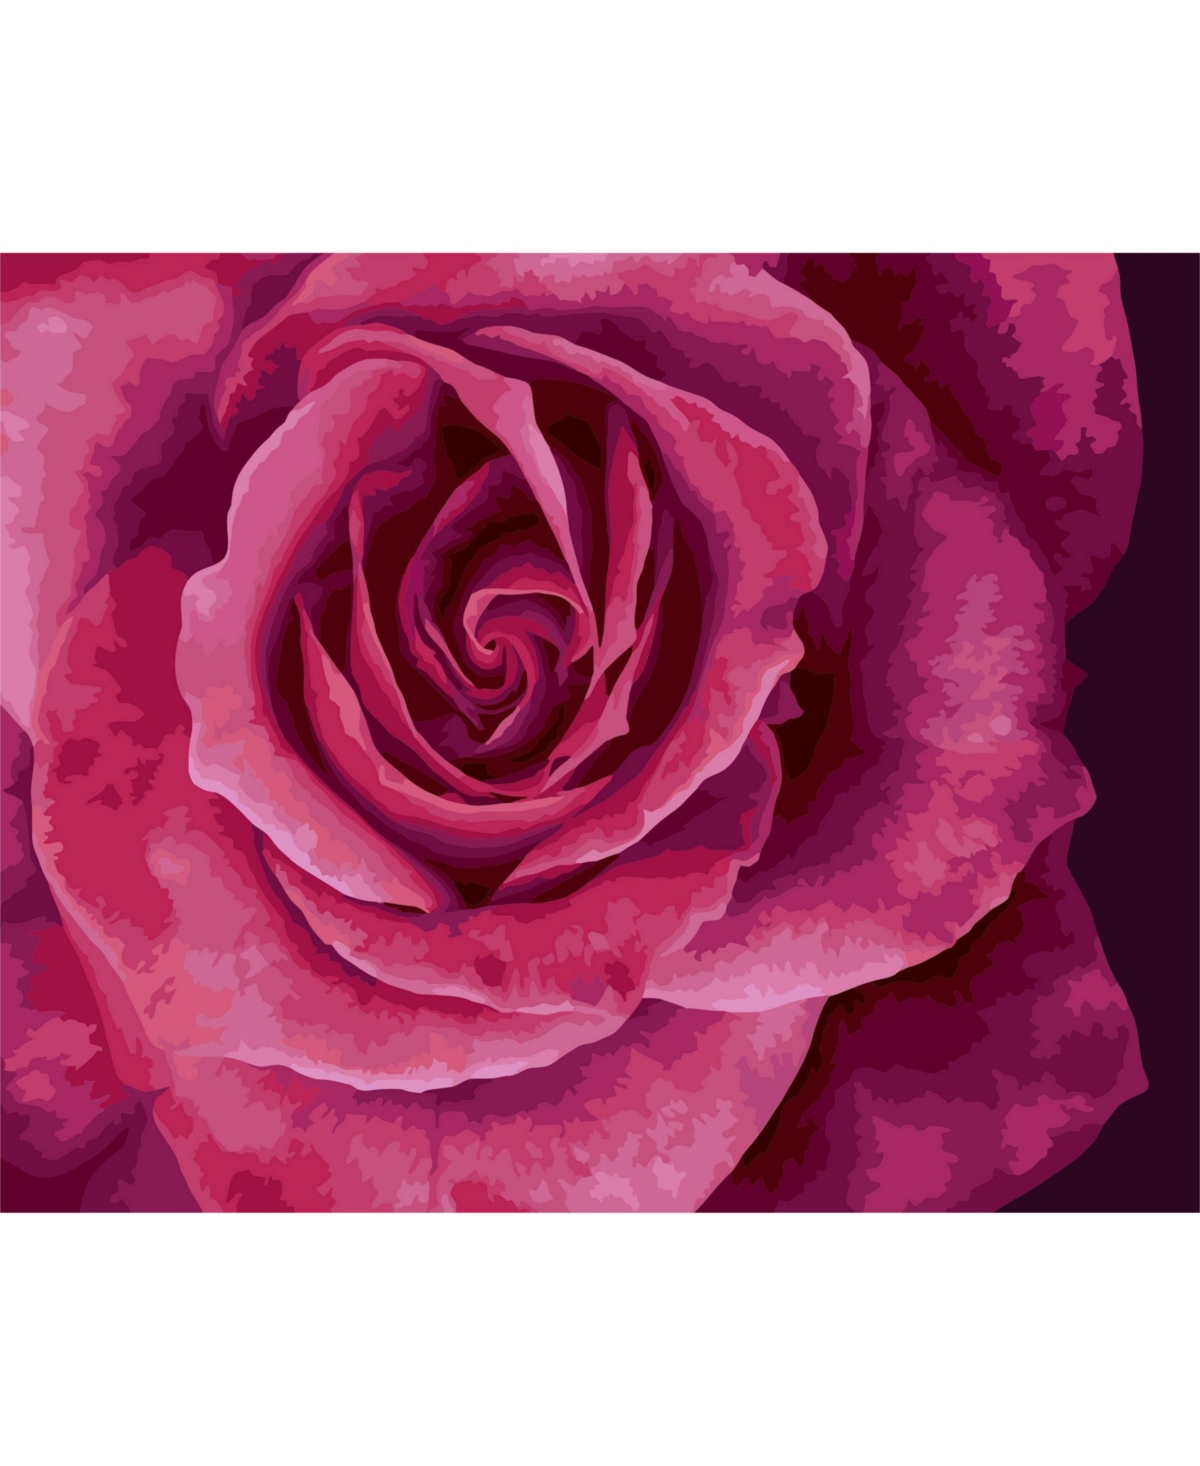 Painting by Numbers Kit Crafting Spark Tender Rose B114 19.69 x 15.75 in